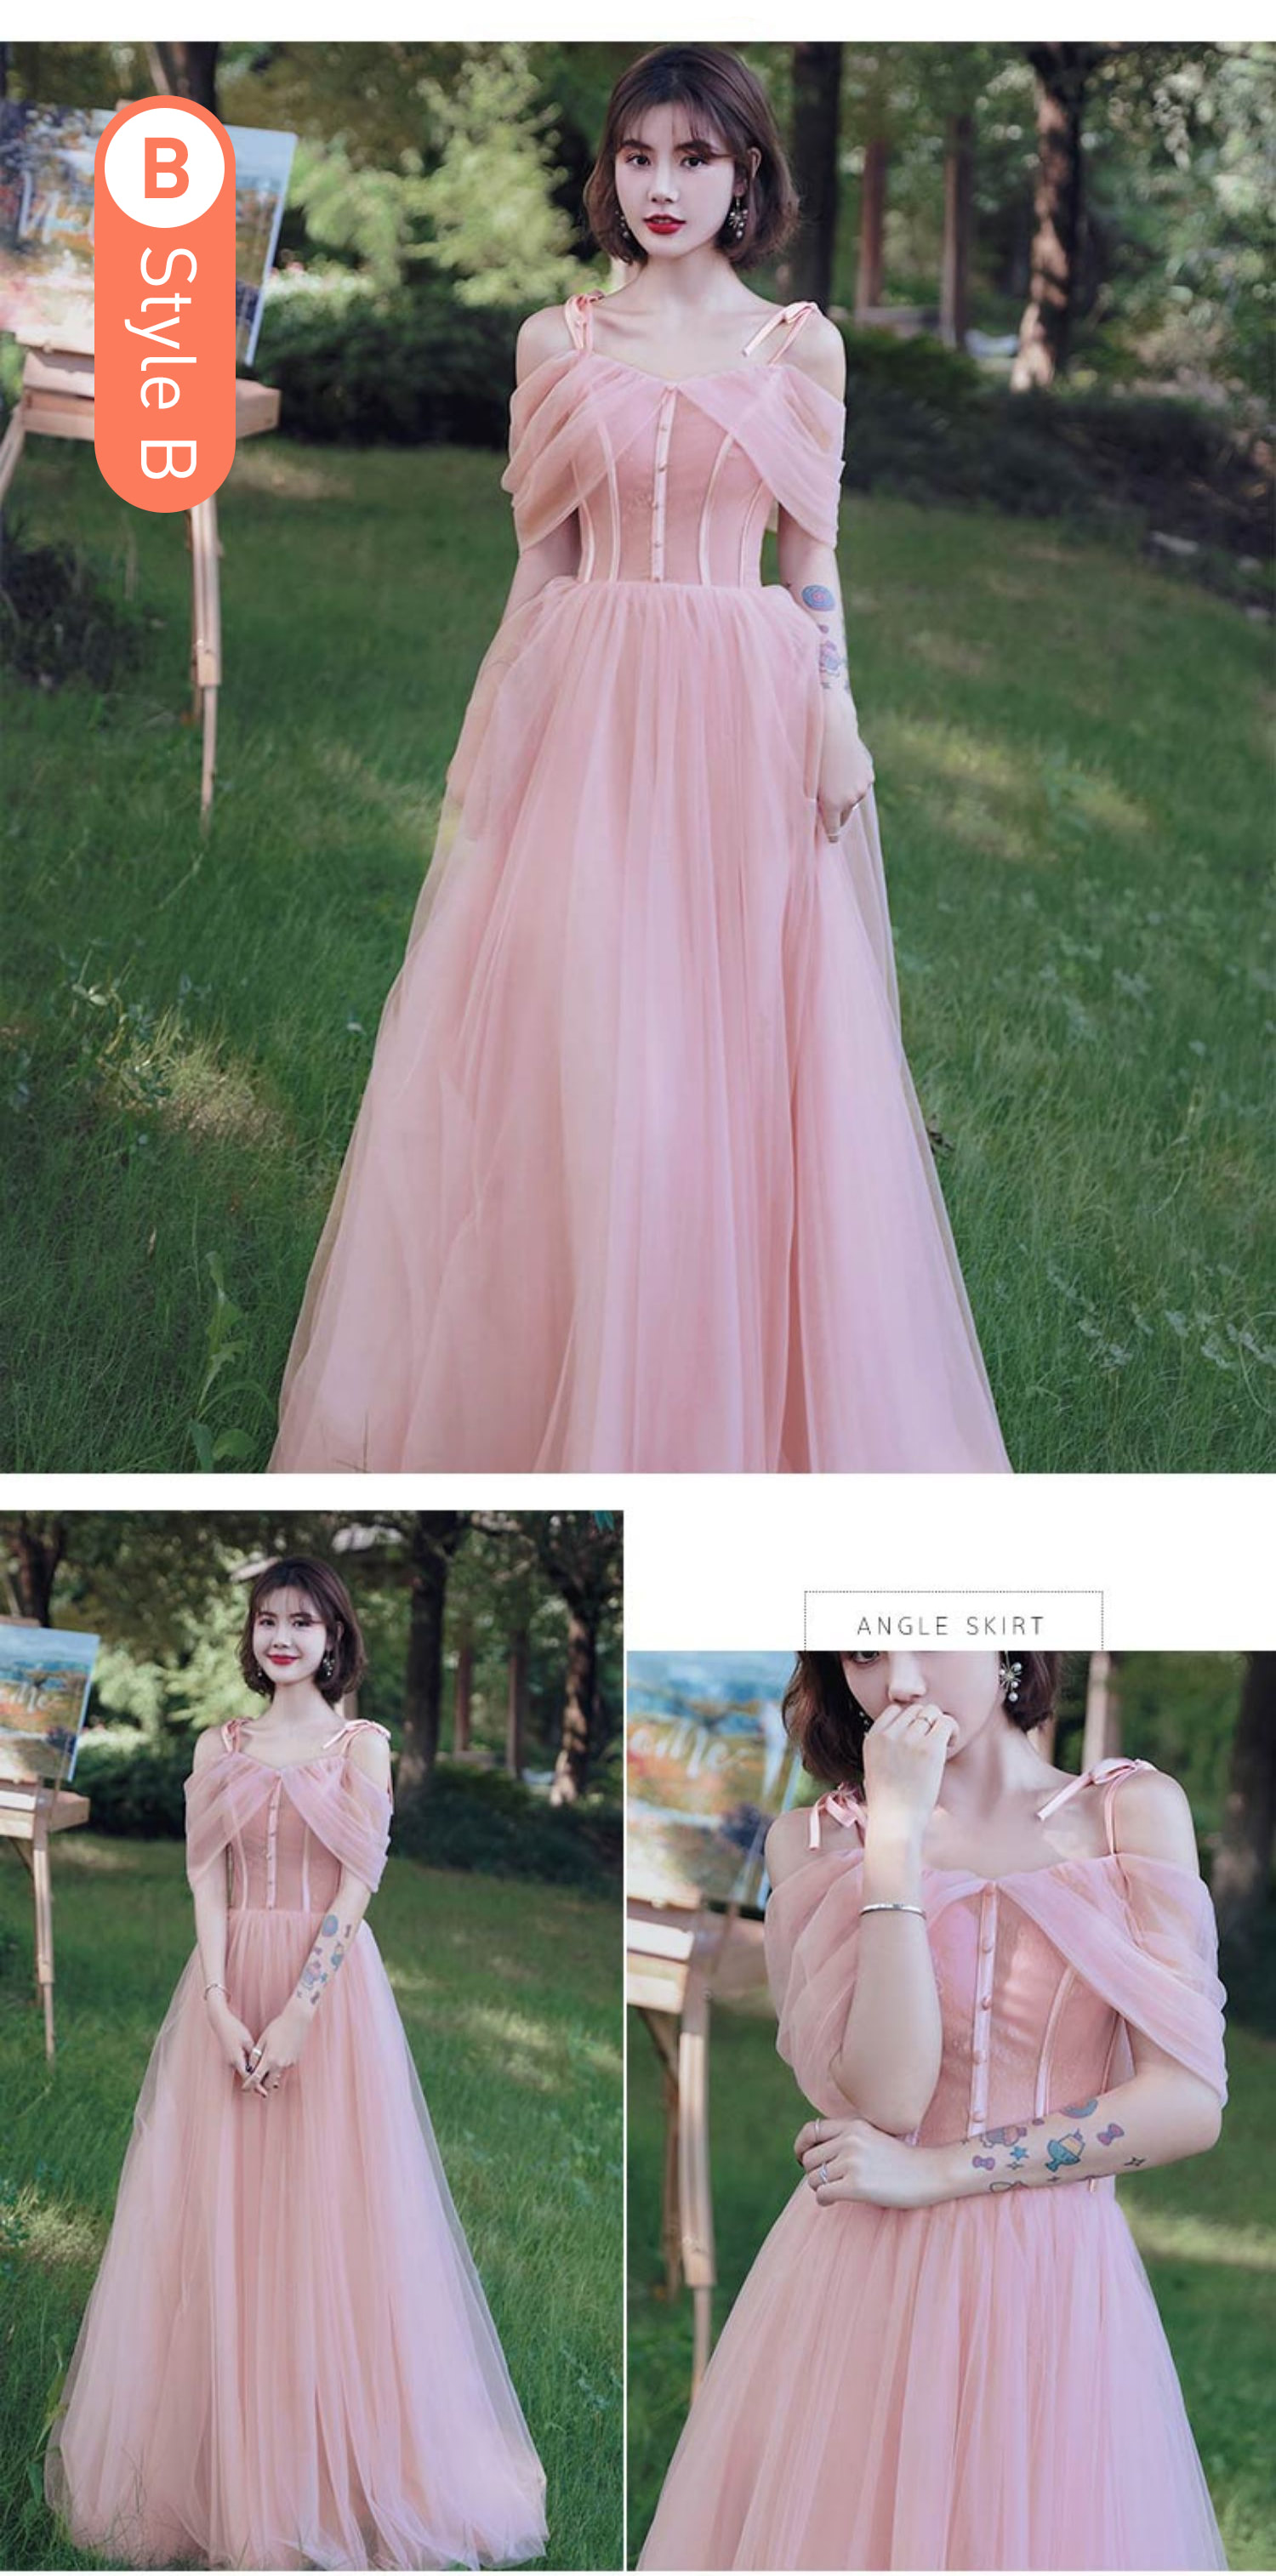 Feminine-Sweet-Pink-Tulle-Bridesmaid-Dress-Prom-Party-Ball-Gown17